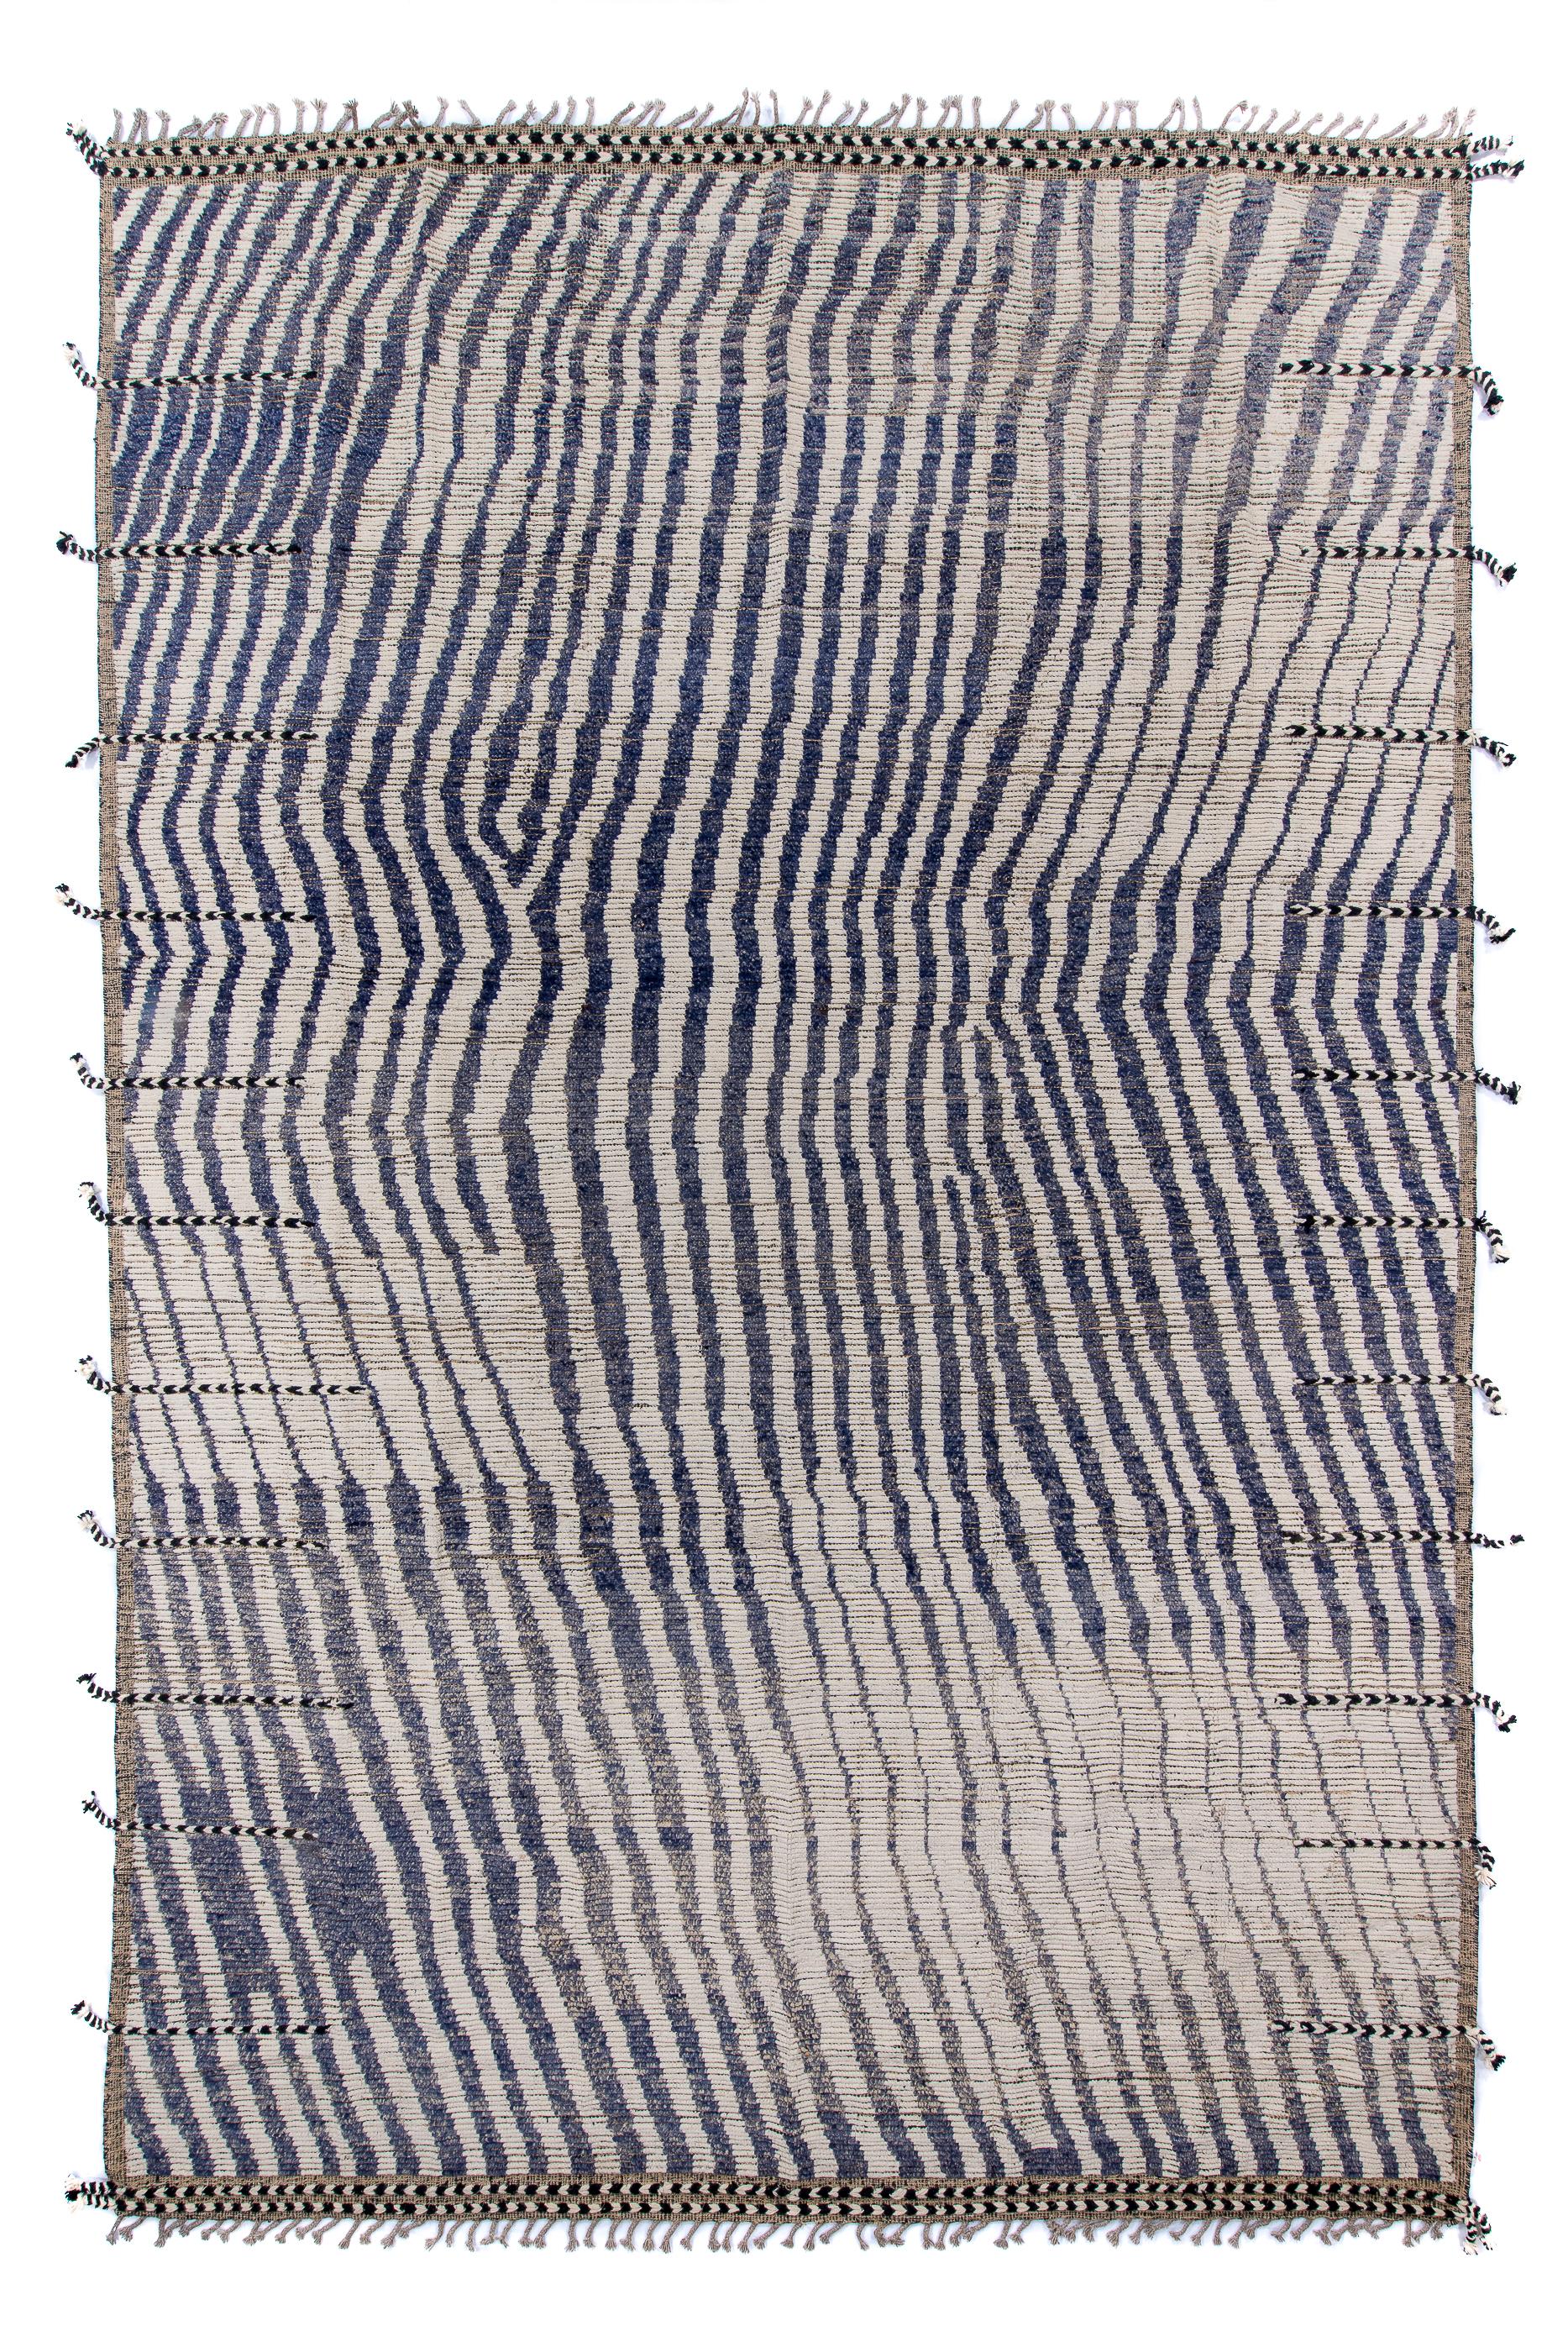 With side and end tassels, this is a two tone, cream and near black, striped rug with a pronounced bend toward one side. The rug looks a bit tipsy with its moire pattern. The stripes thicken and thin, and there are a couple of joins toward one